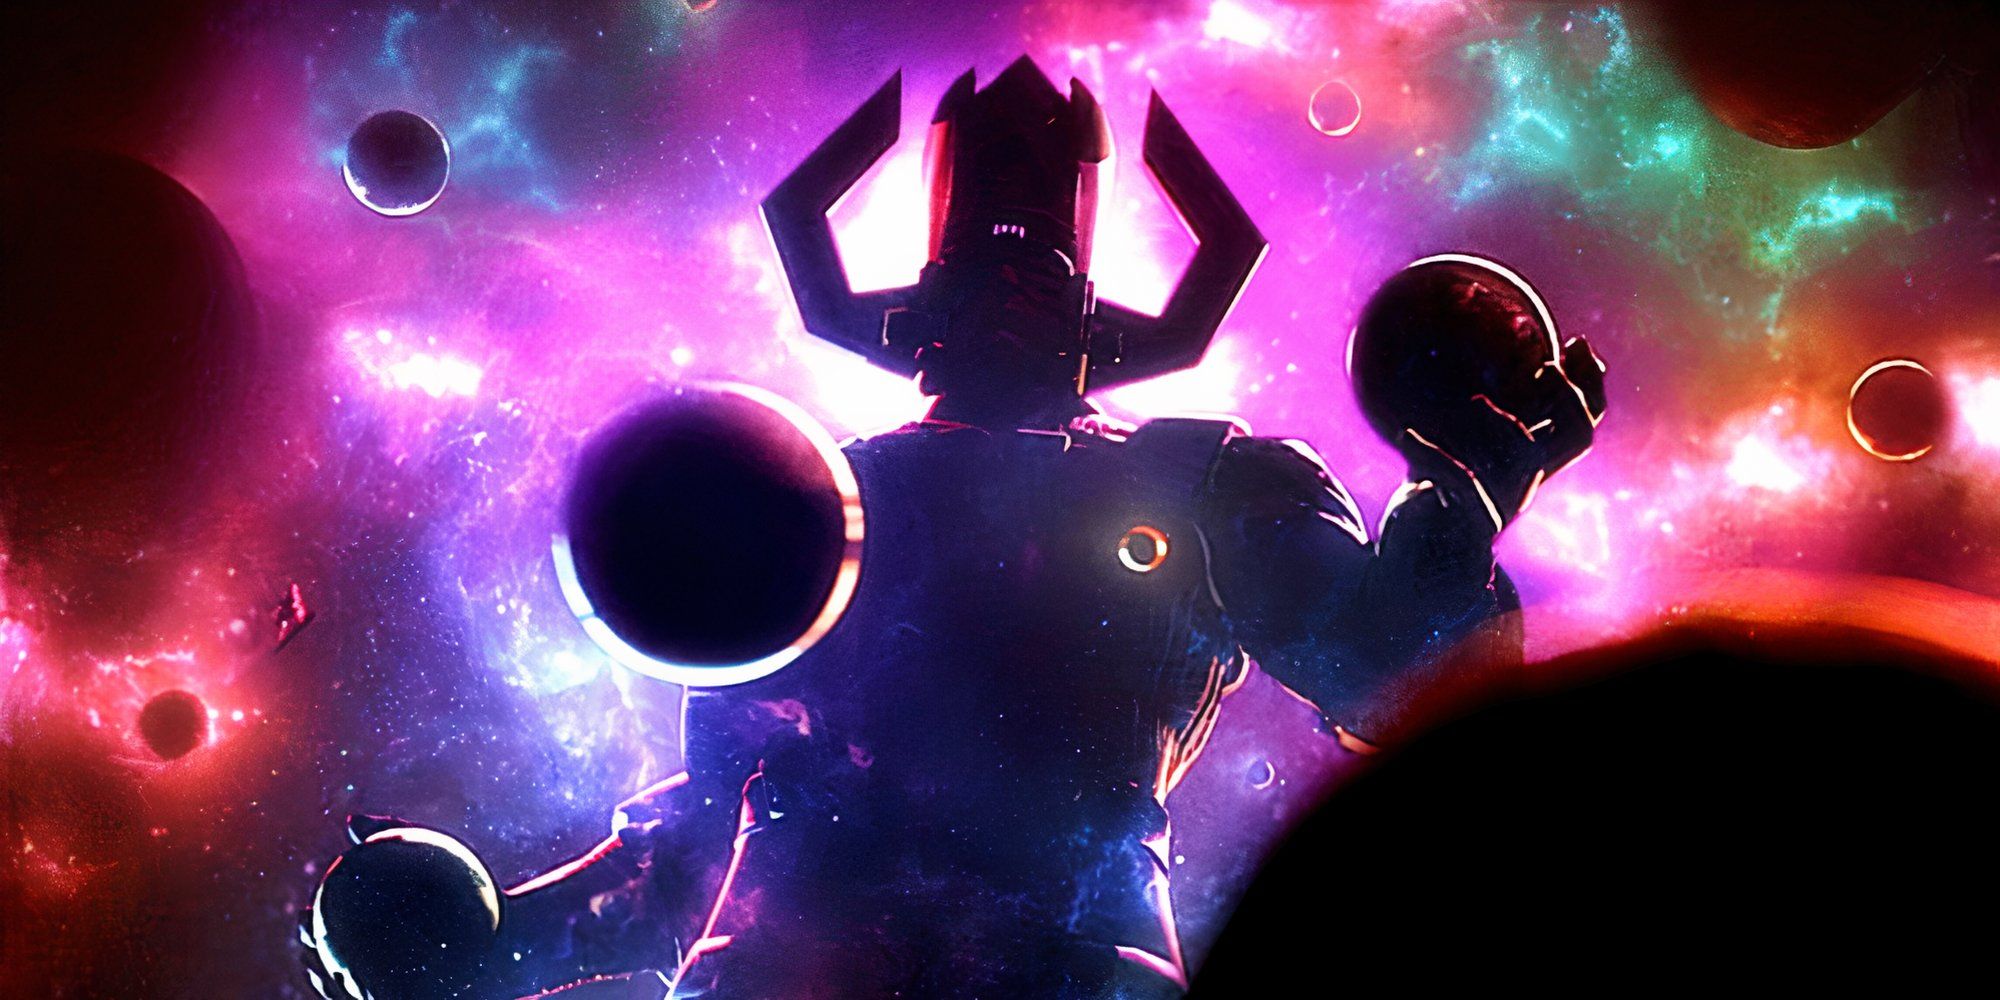 Galactus Grabs Planets in Outer Space in Marvel Comics Art